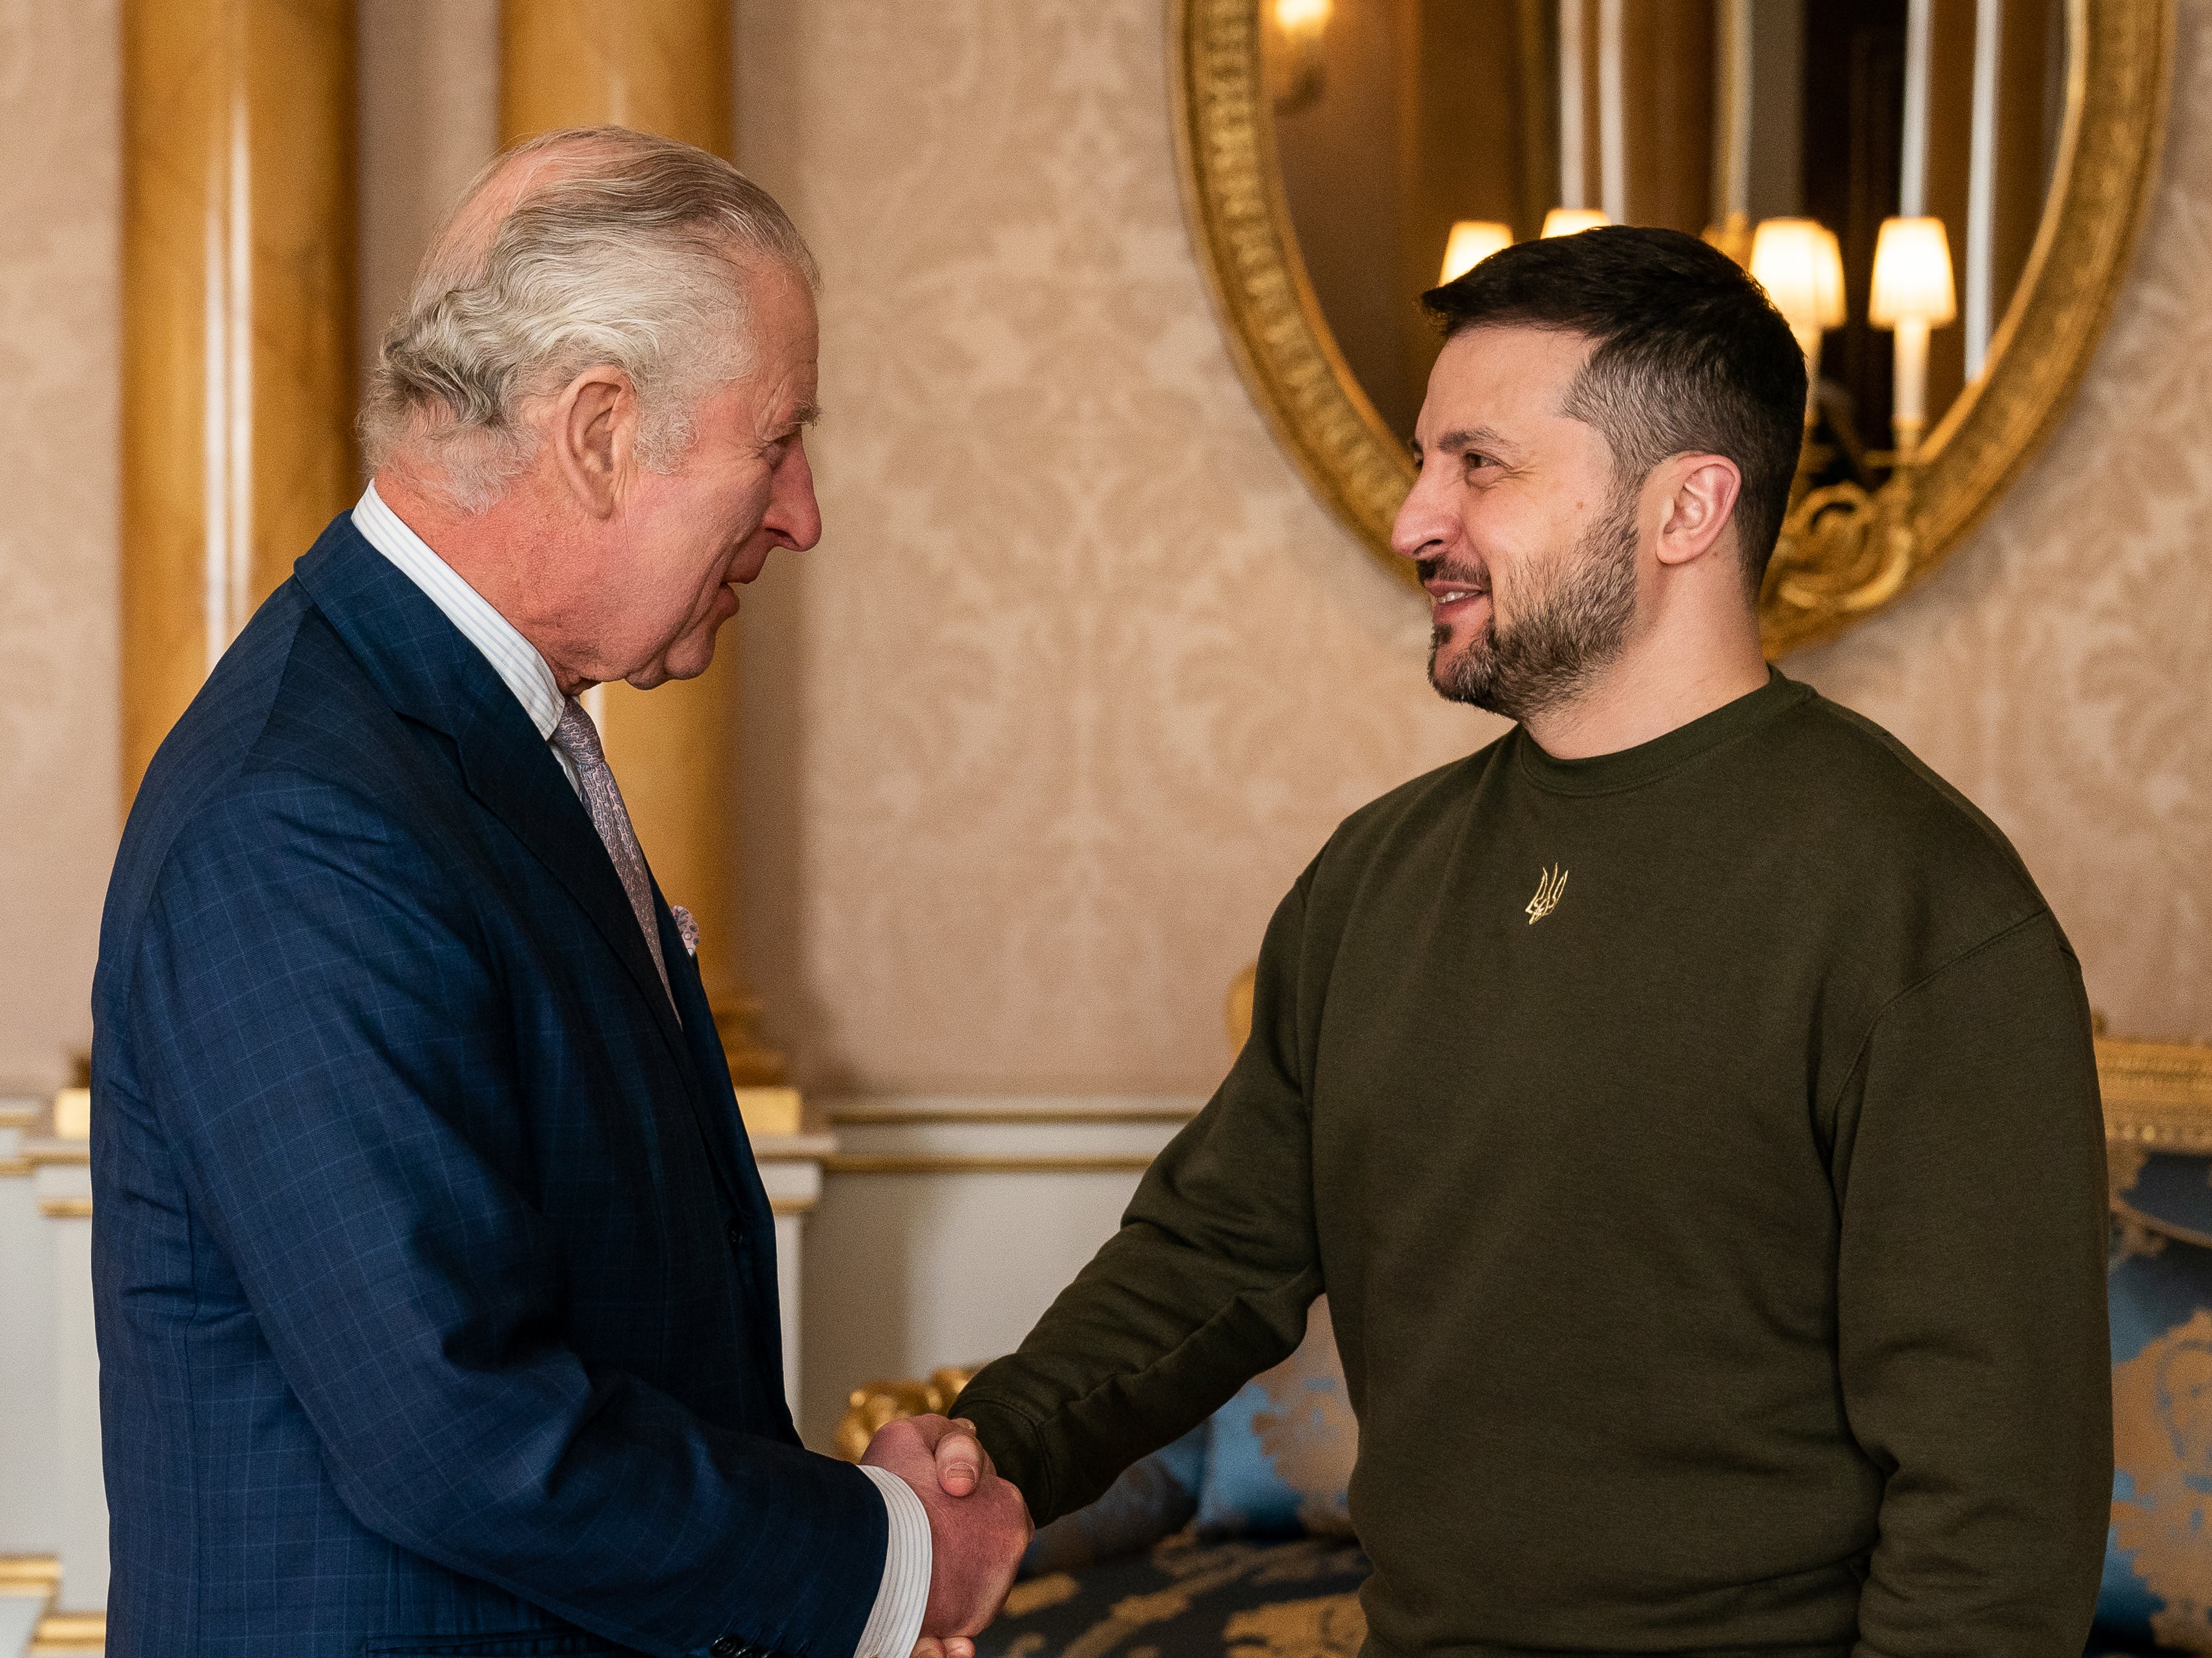 Fake news sites are falsely claiming the King has sold his royal residence Highgrove House to Ukrainian President Volodymyr Zelenskyy for £20 million